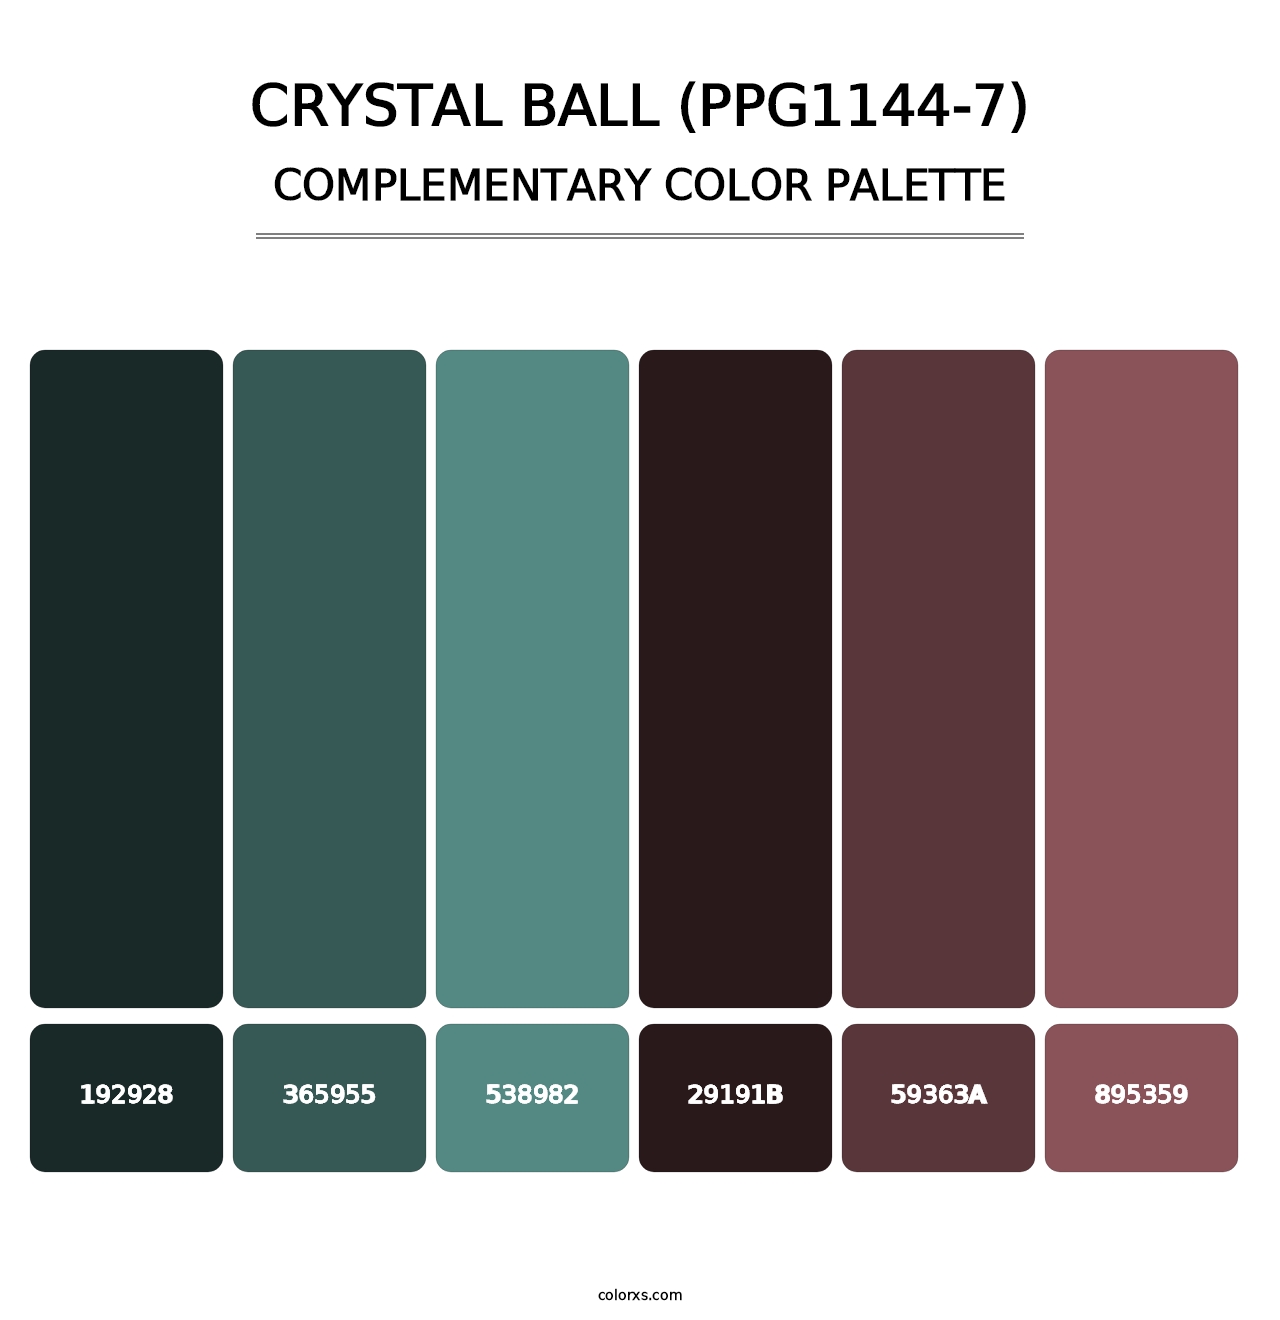 Crystal Ball (PPG1144-7) - Complementary Color Palette